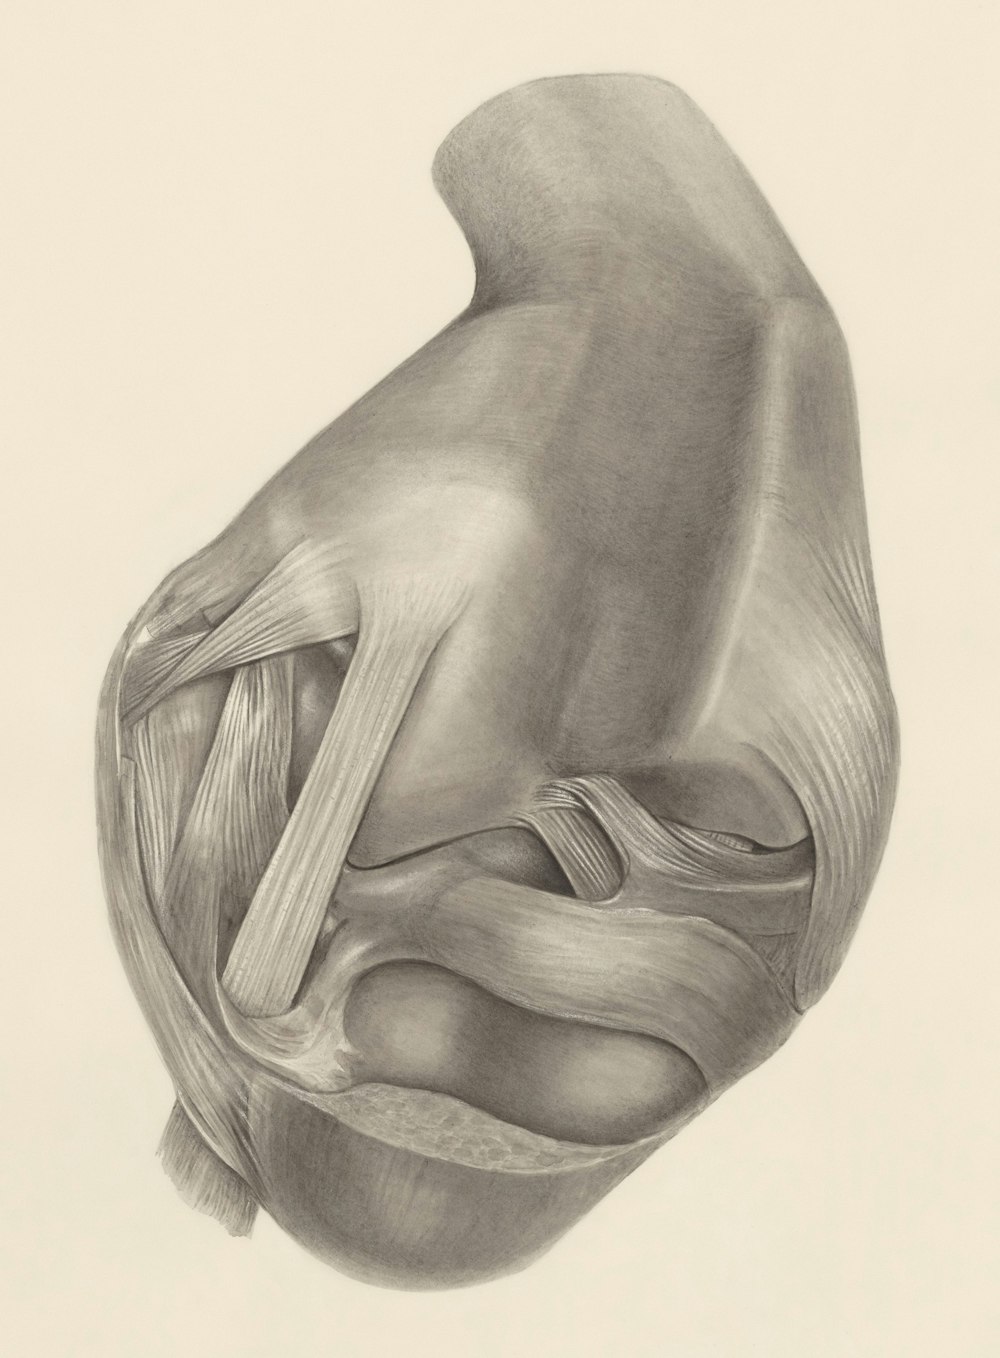 a pencil drawing of a human knee